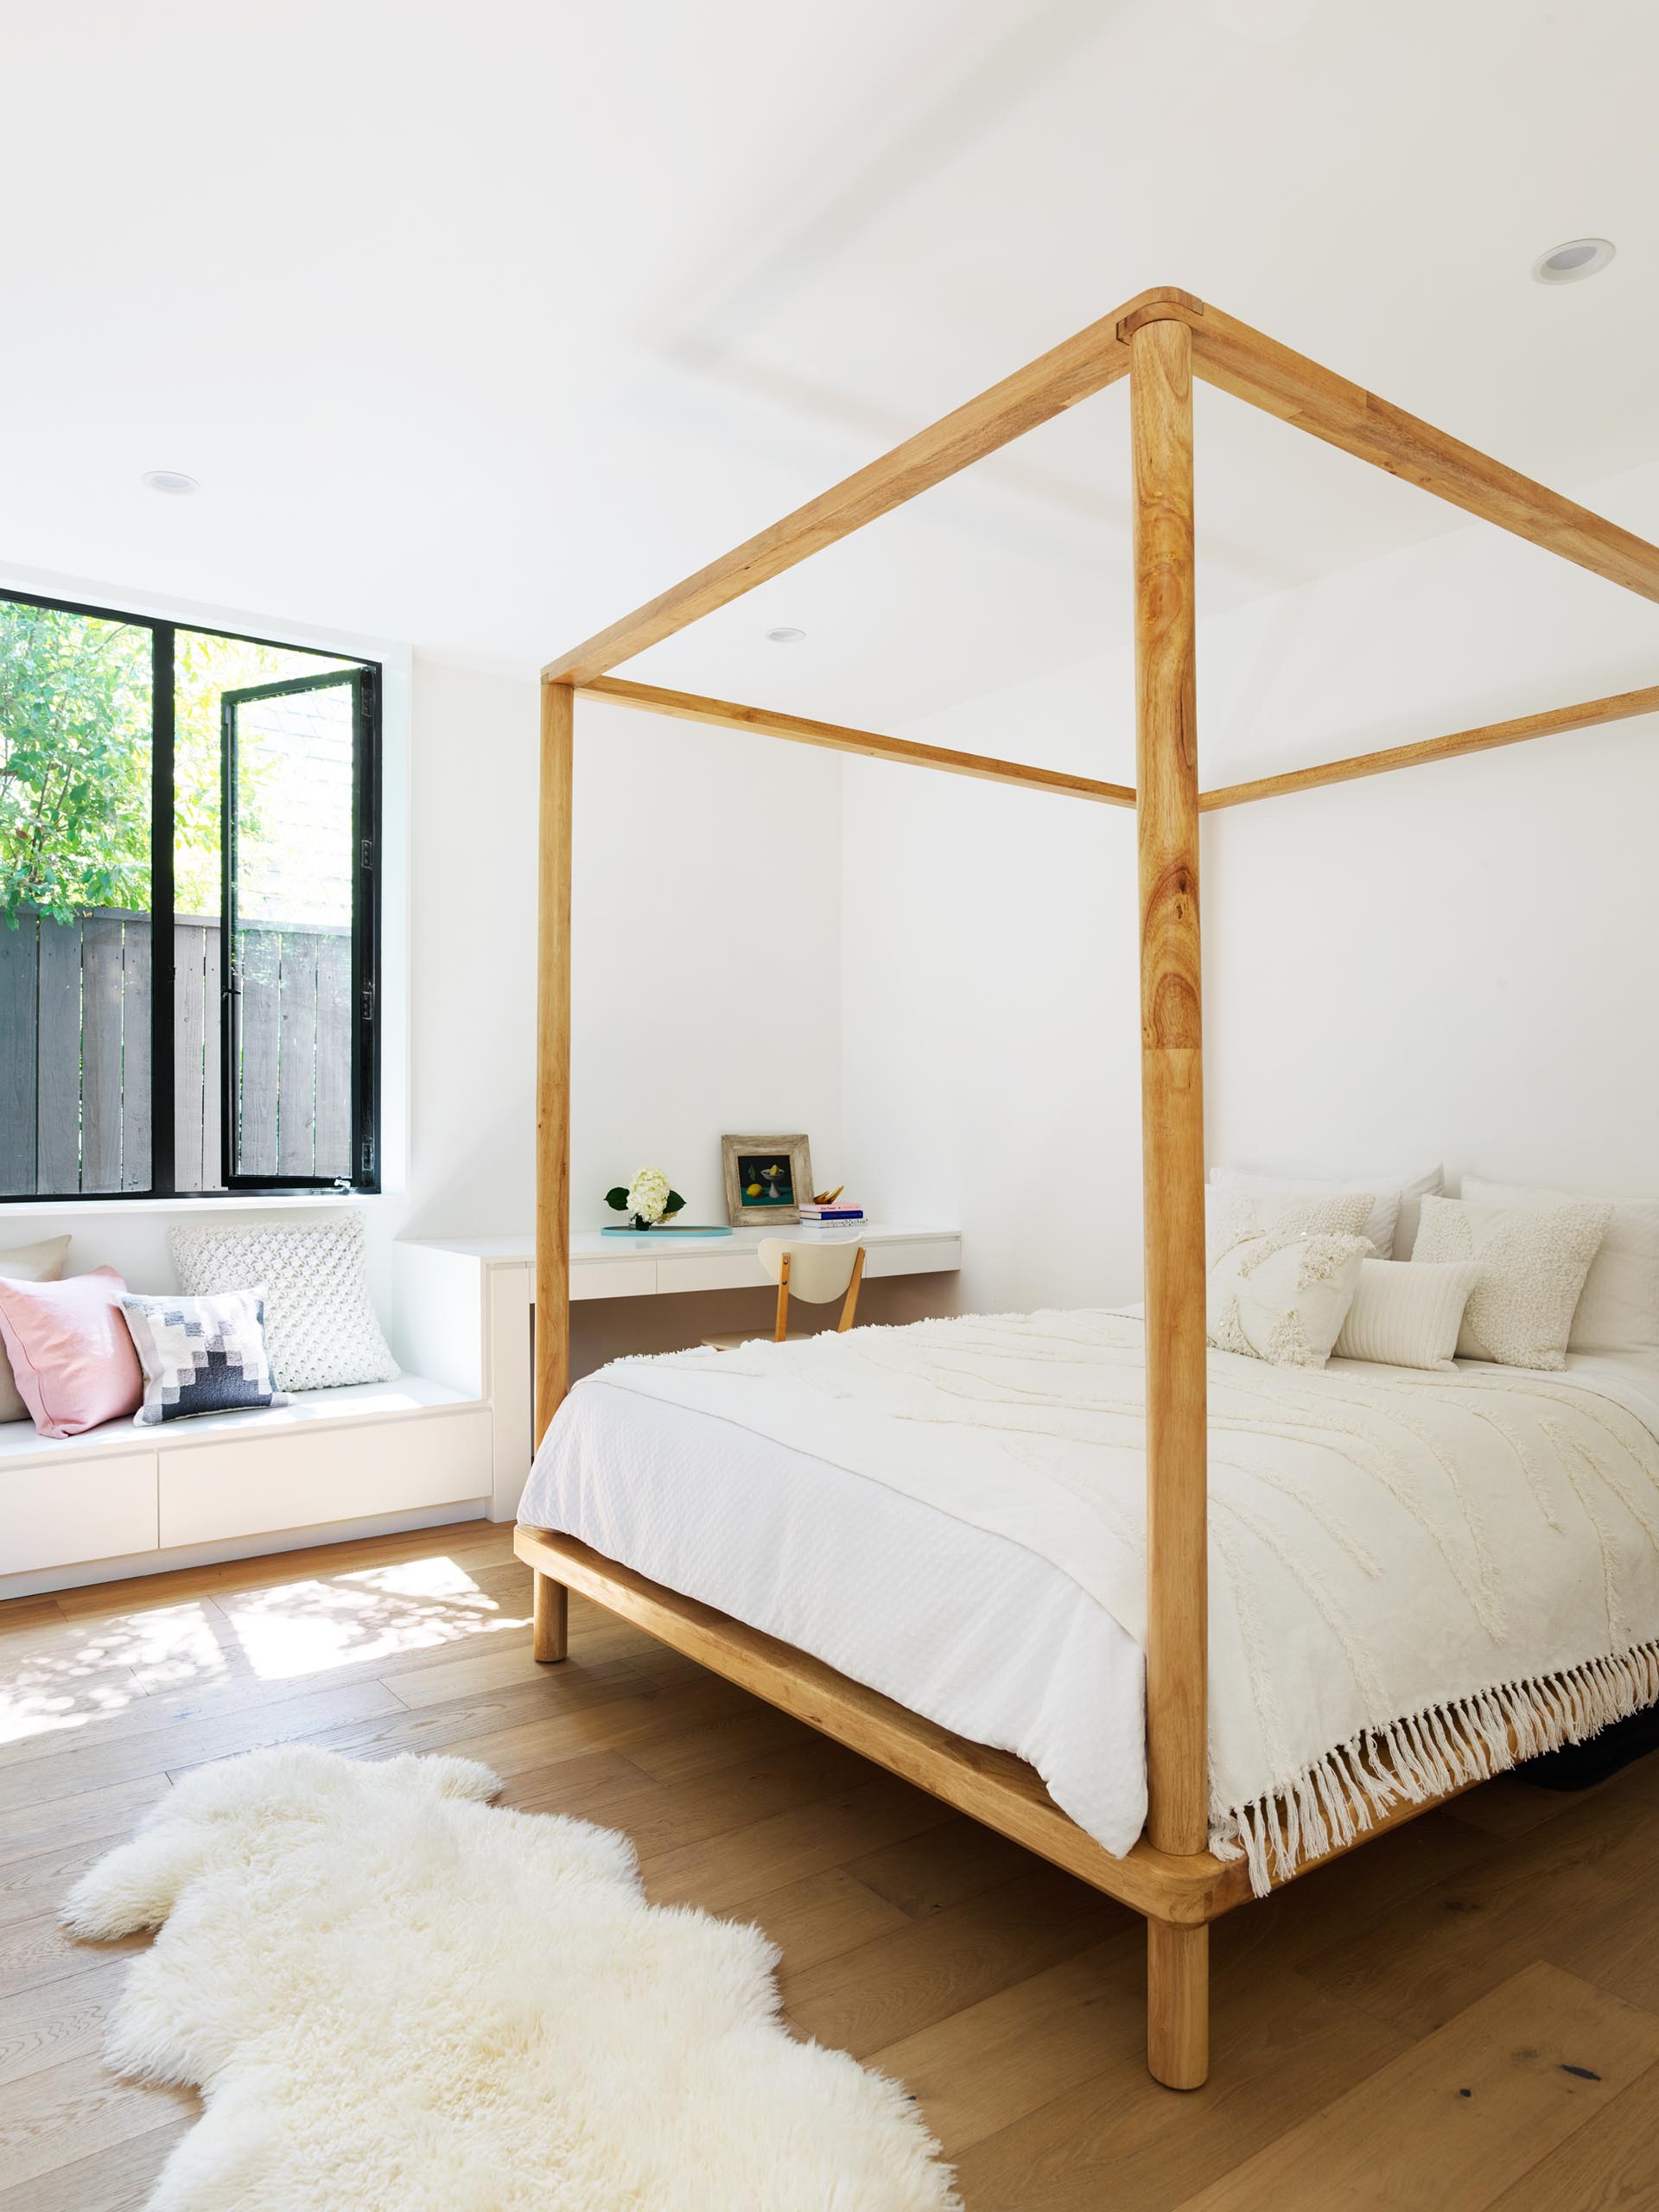 A kids bedroom with a four poster wood bed frame, and along the wall is a built-in desk and bench.